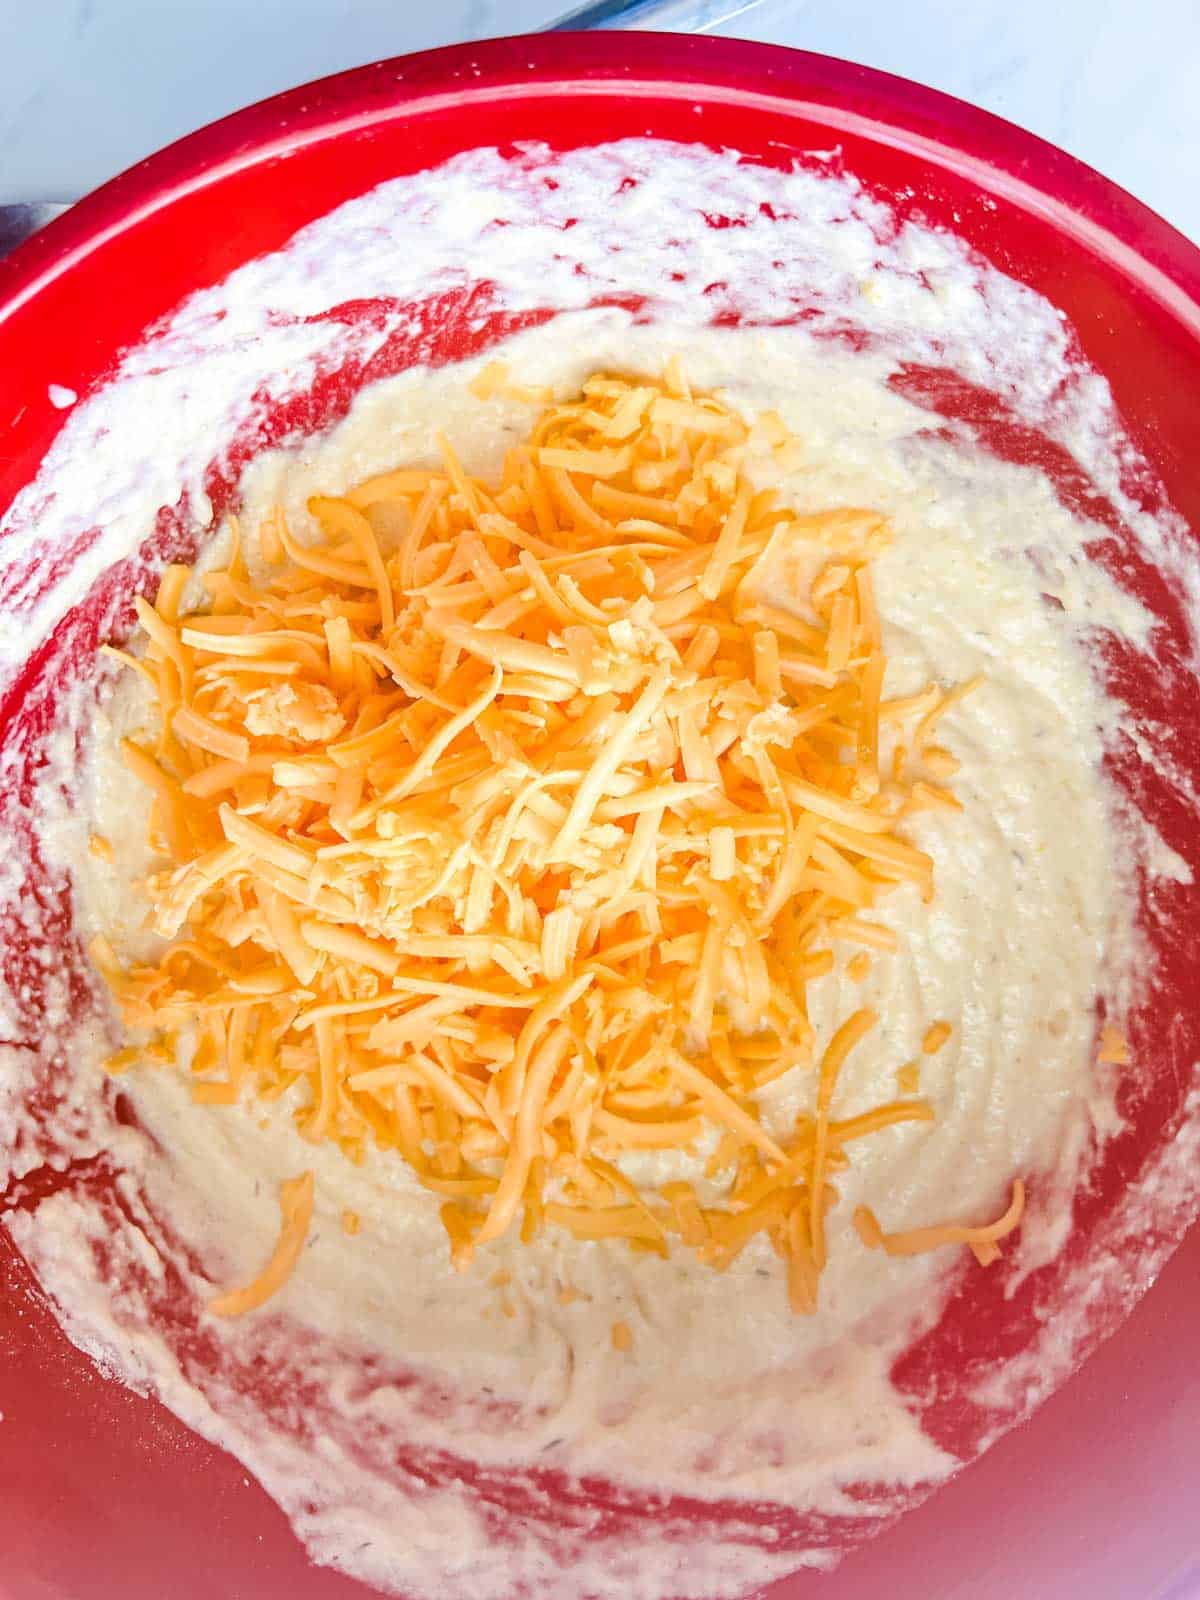 Cornbread batter with cheese added in a large bowl.